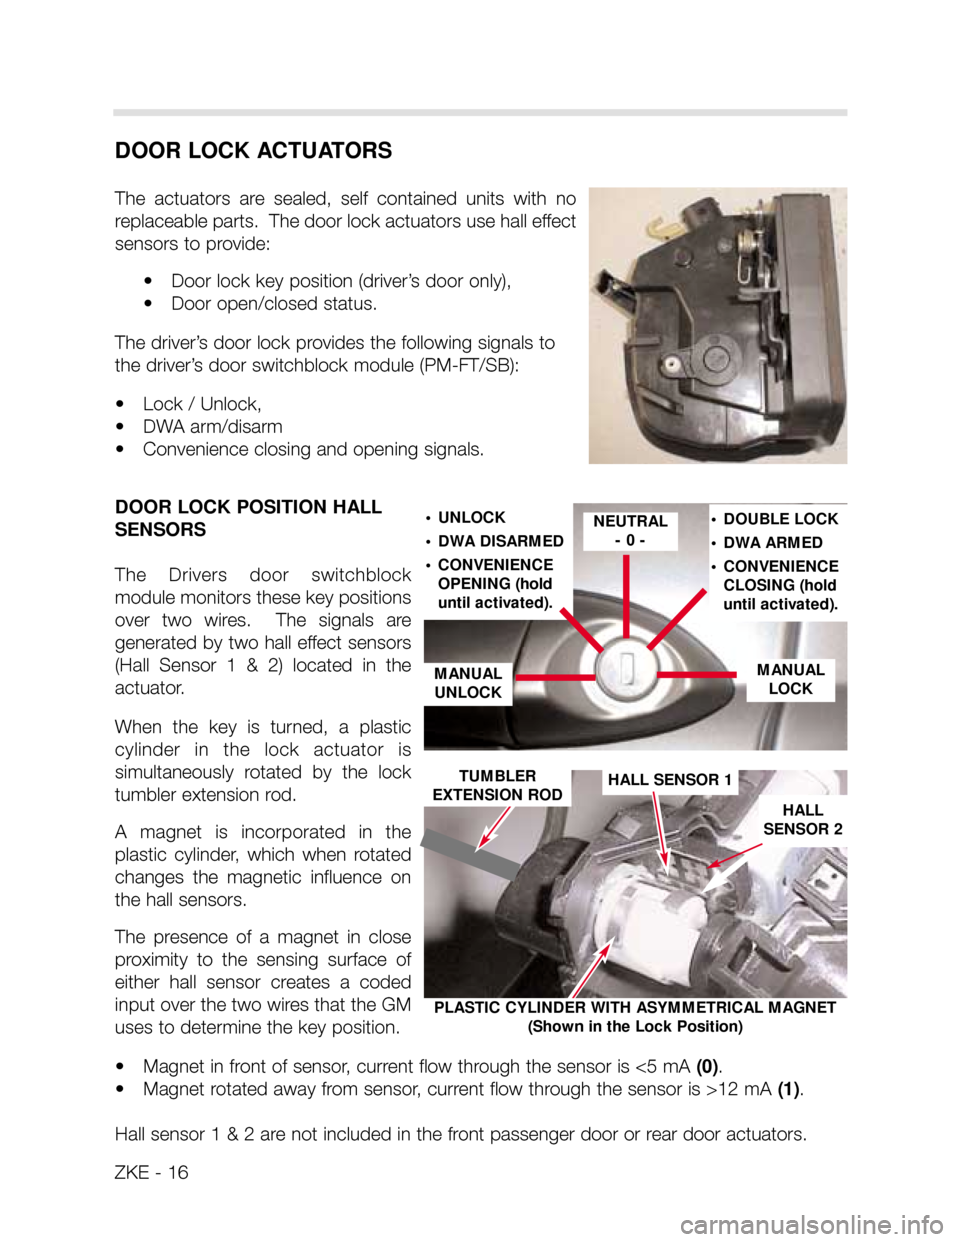 BMW X5 2006 E53 Central Body Electronics User Guide DOOR LOCK ACTUATORS
The  actuators  are  sealed,  self  contained  units  with  no
replaceable parts.  The door lock actuators use hall effect
sensors to provide:
• Door lock key position (driver’